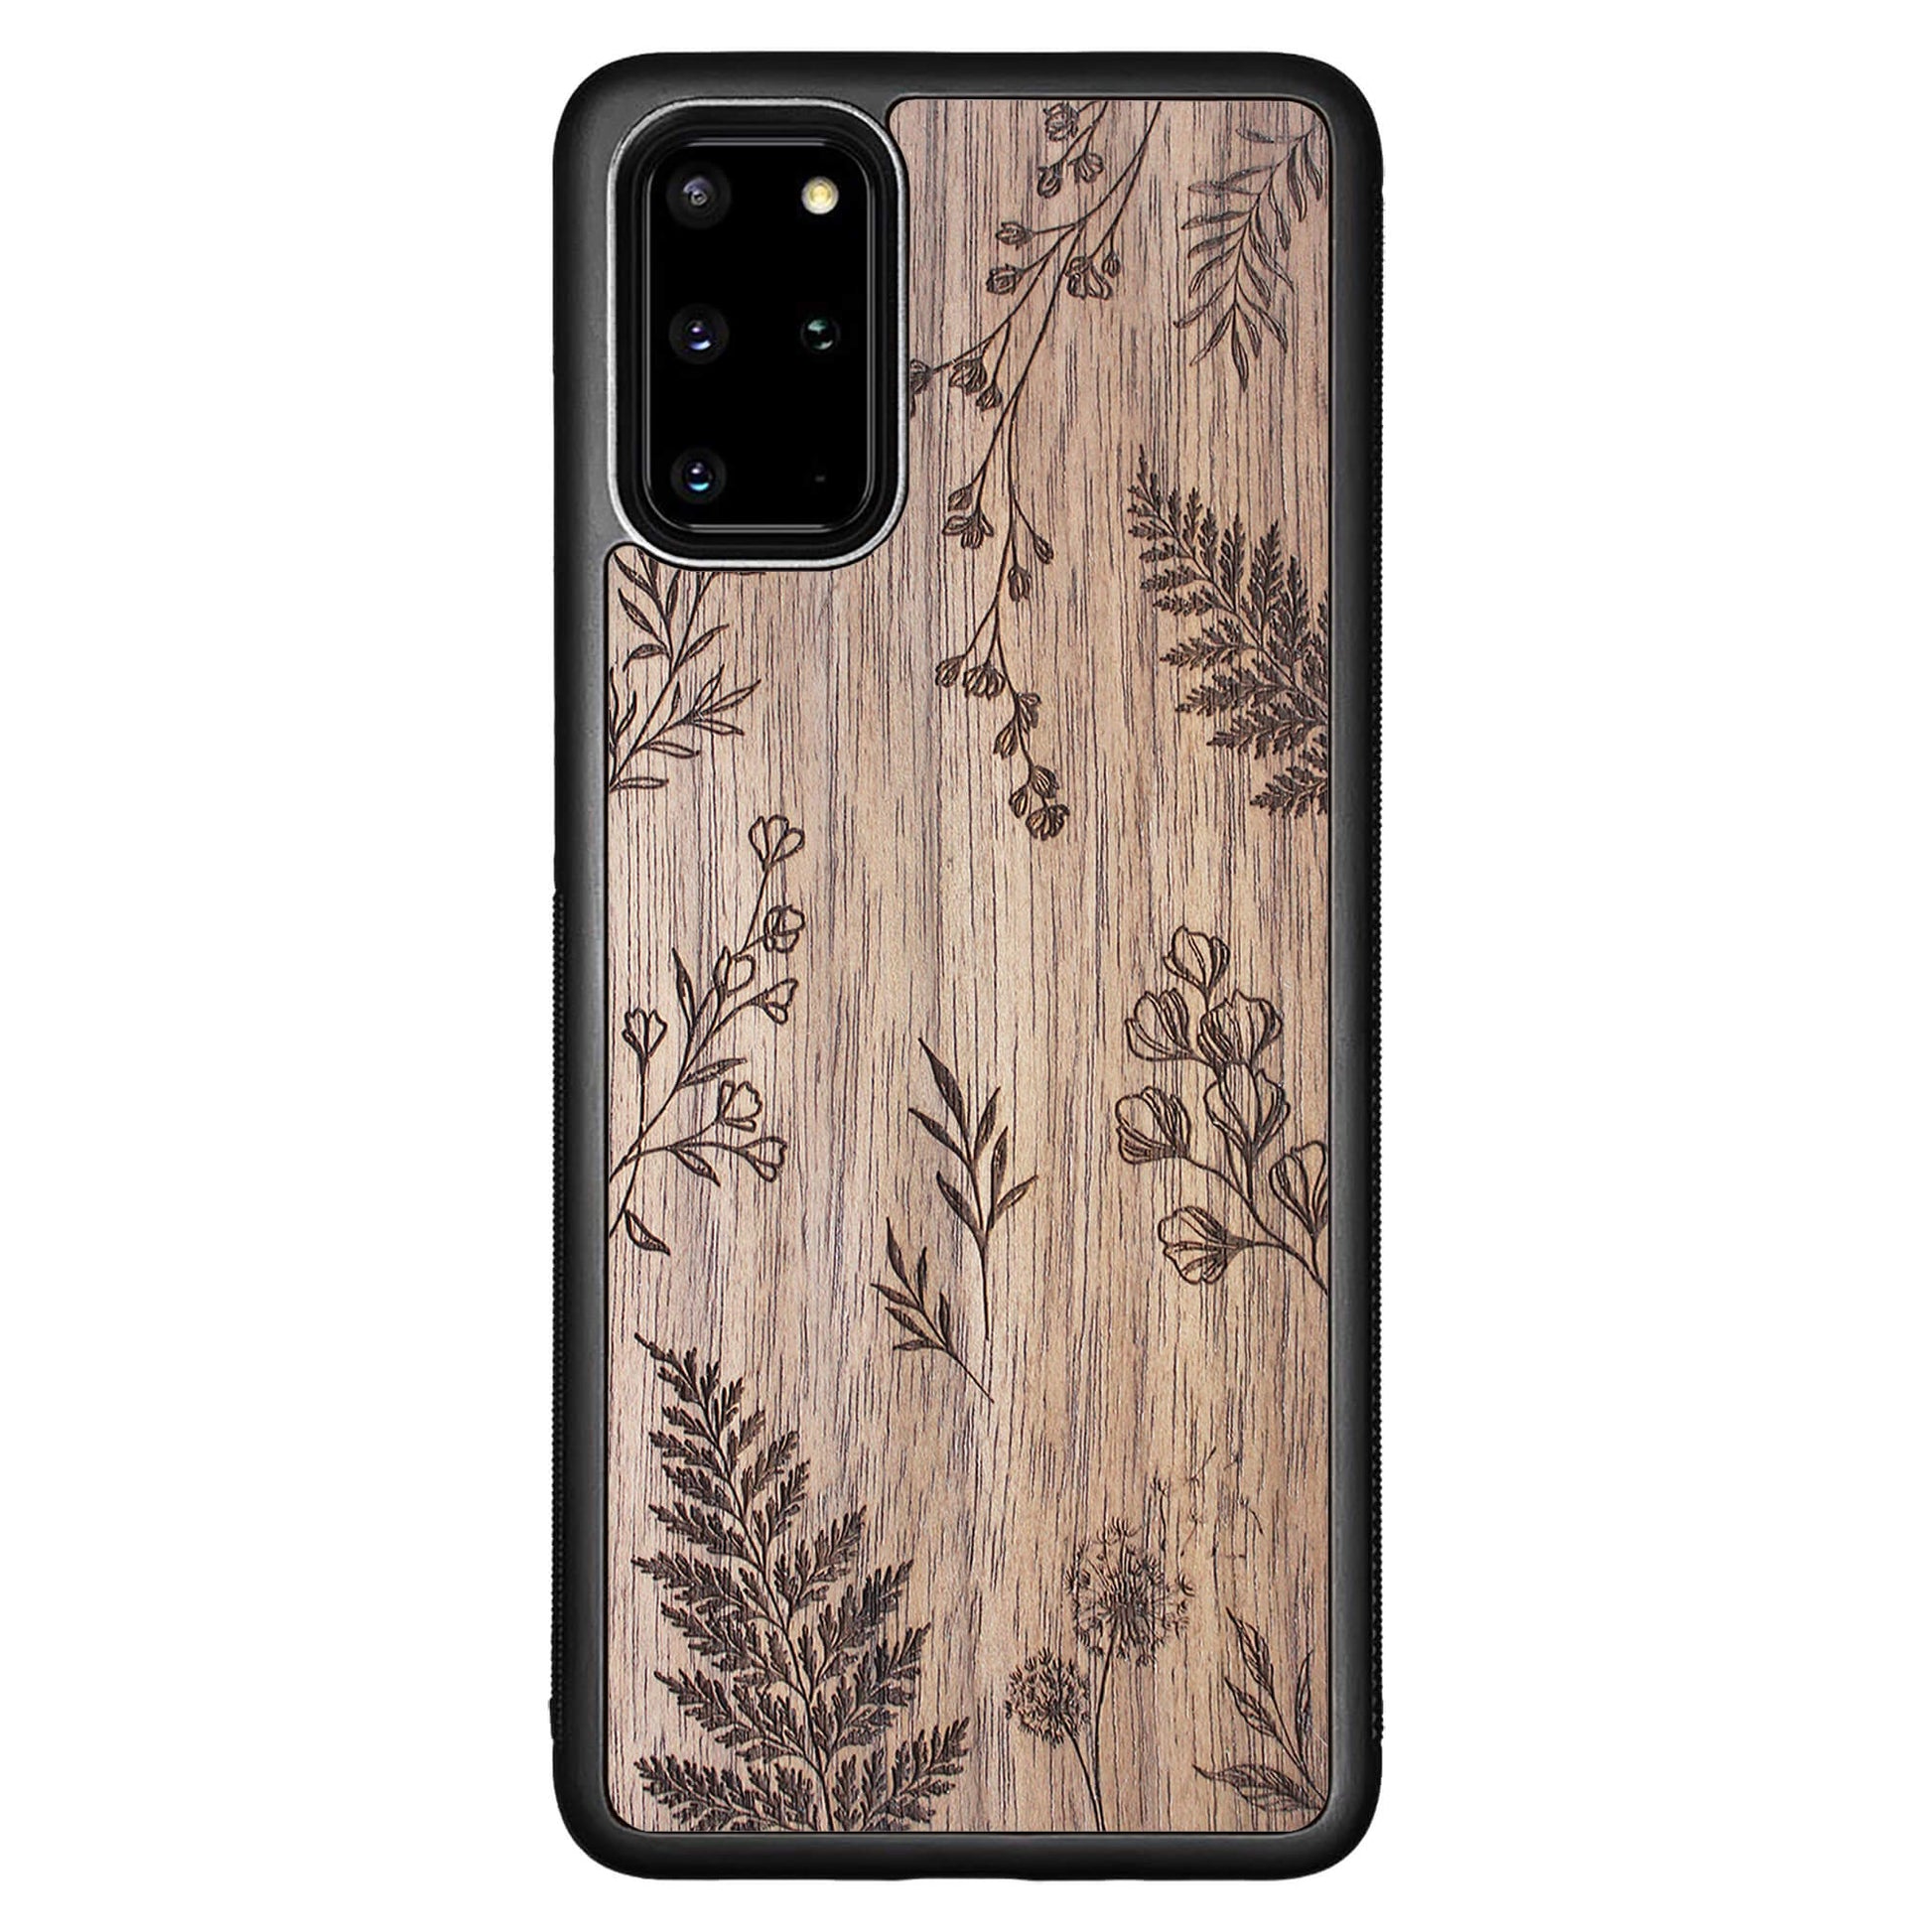 Wooden Case for Samsung Galaxy S20 Plus Botanical